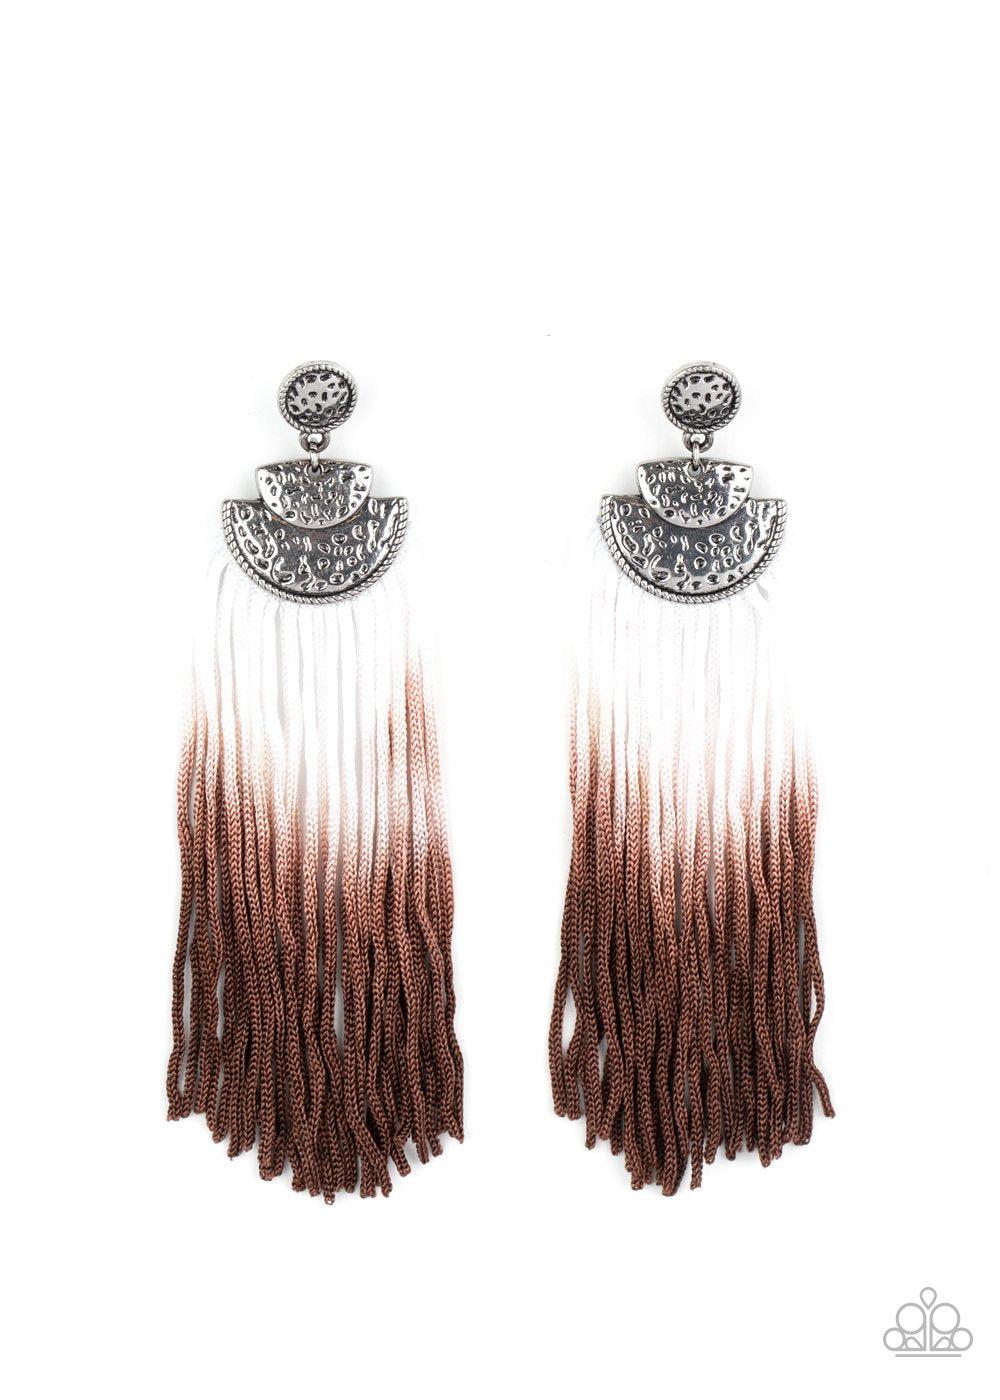 DIP It Up Brown and White Ombre Fringe Earrings - Paparazzi Accessories - lightbox -CarasShop.com - $5 Jewelry by Cara Jewels